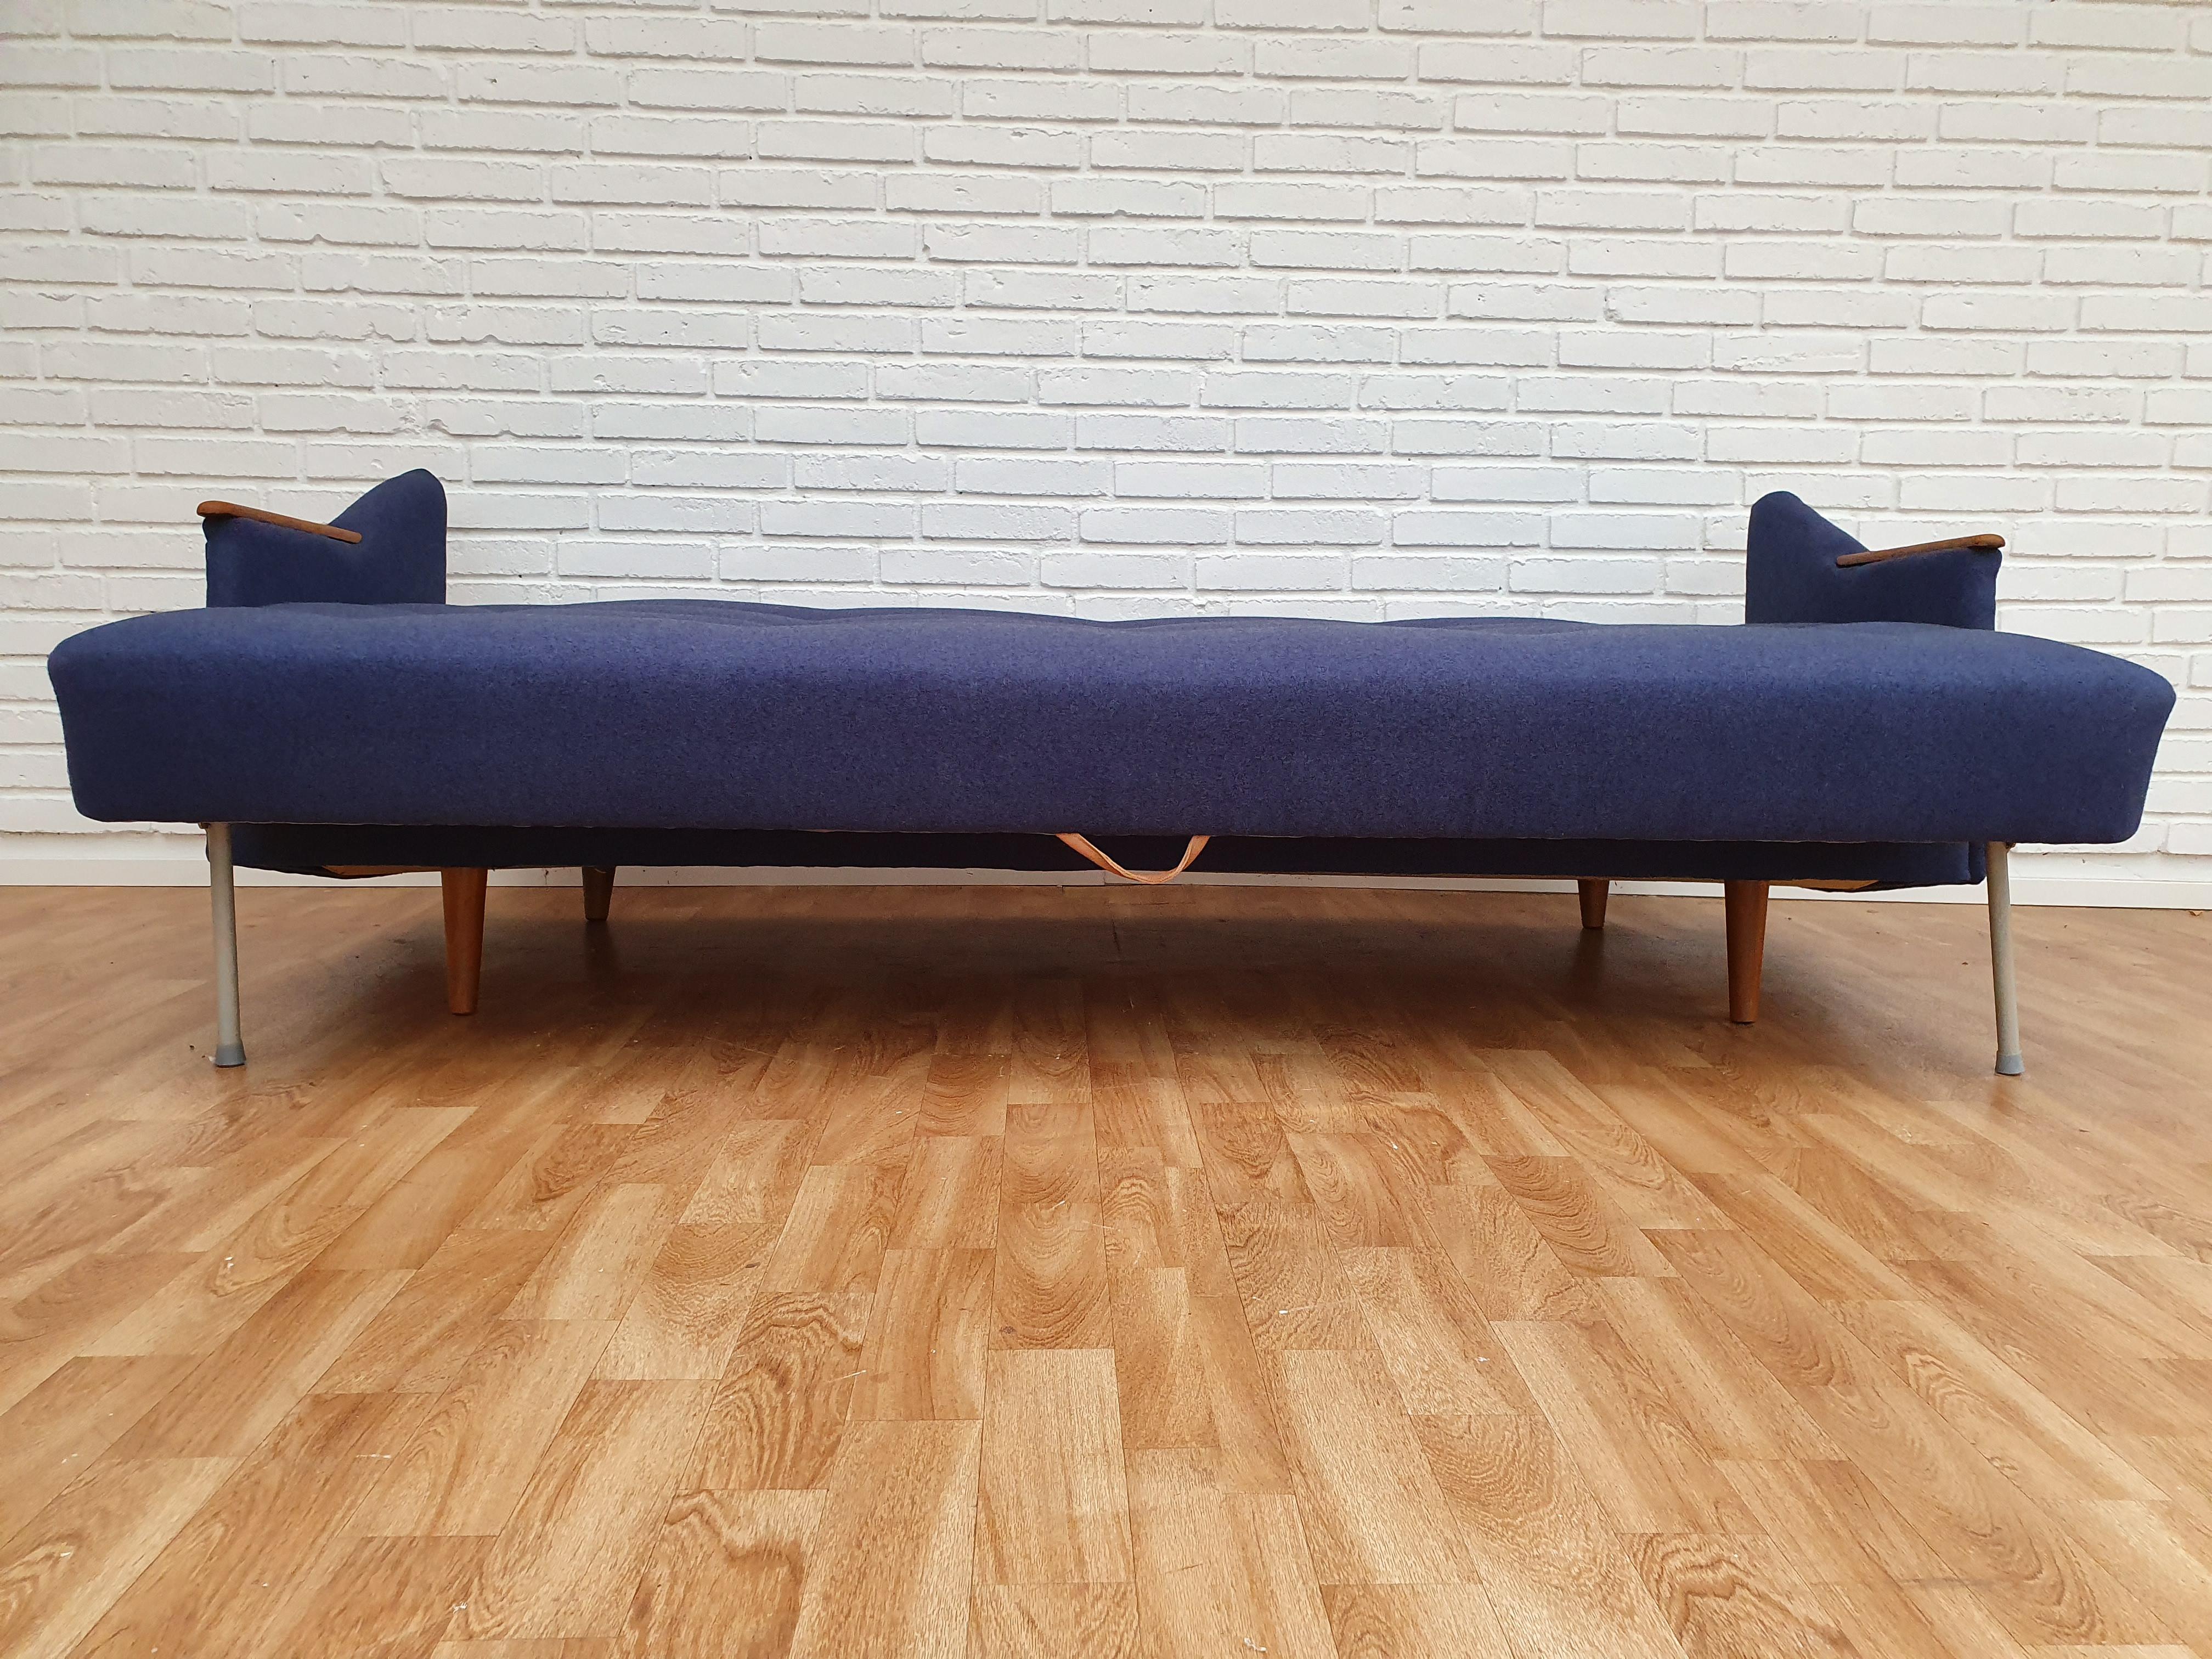 Danish Designed, 3 Persons Sofa Bed, 1960s, Completely Restored im Angebot 3